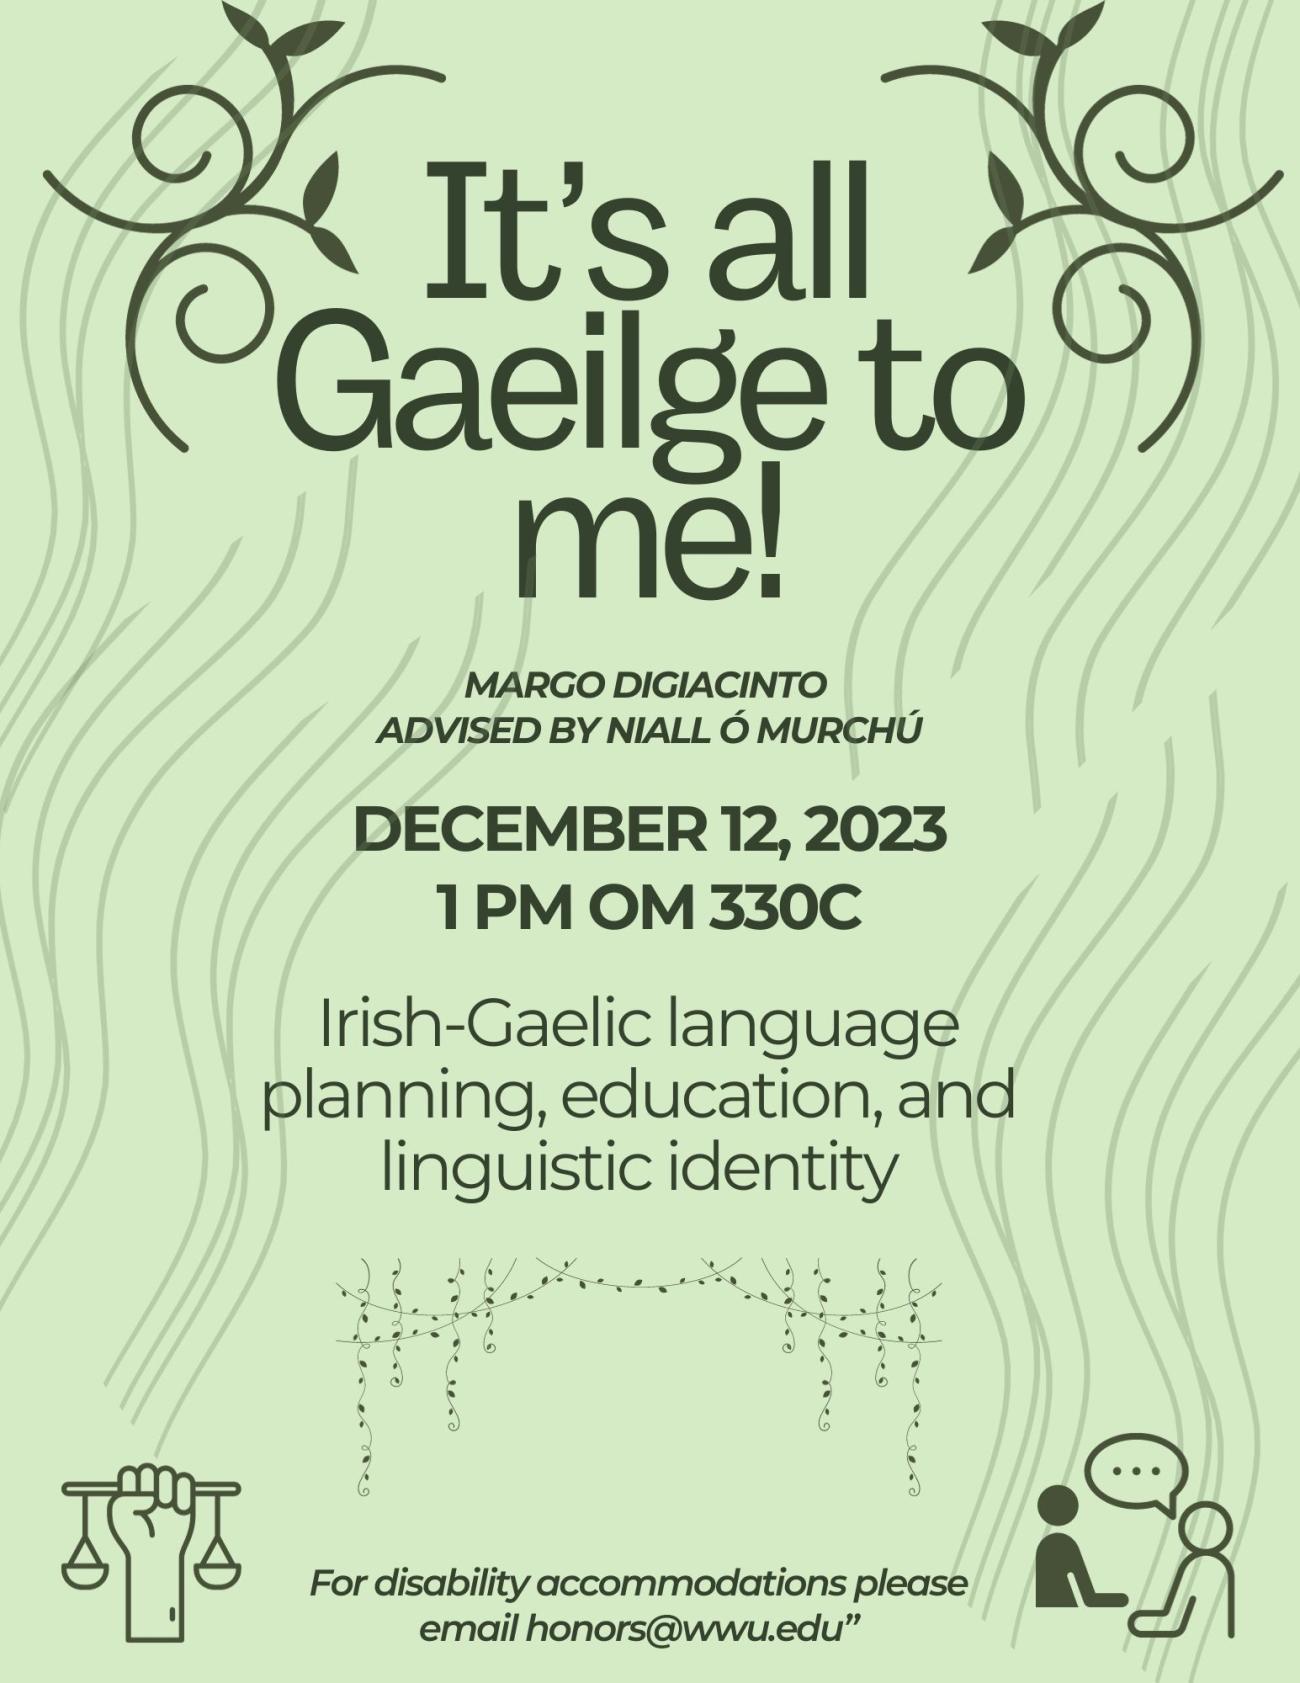 Green poster advertising presentation entitled It’s all Gaeilge to me: Irish Gaelic language planning, education, and linguistic identity. By Margo Digiacinto, advised by Niall Ó Murchú. December 12, 2023 1 pm Old Main 330C. Poster includes graphics of vines, waves, people talking and fist holding a scale. For Disability Accommodation please email honors@wwu.edu.